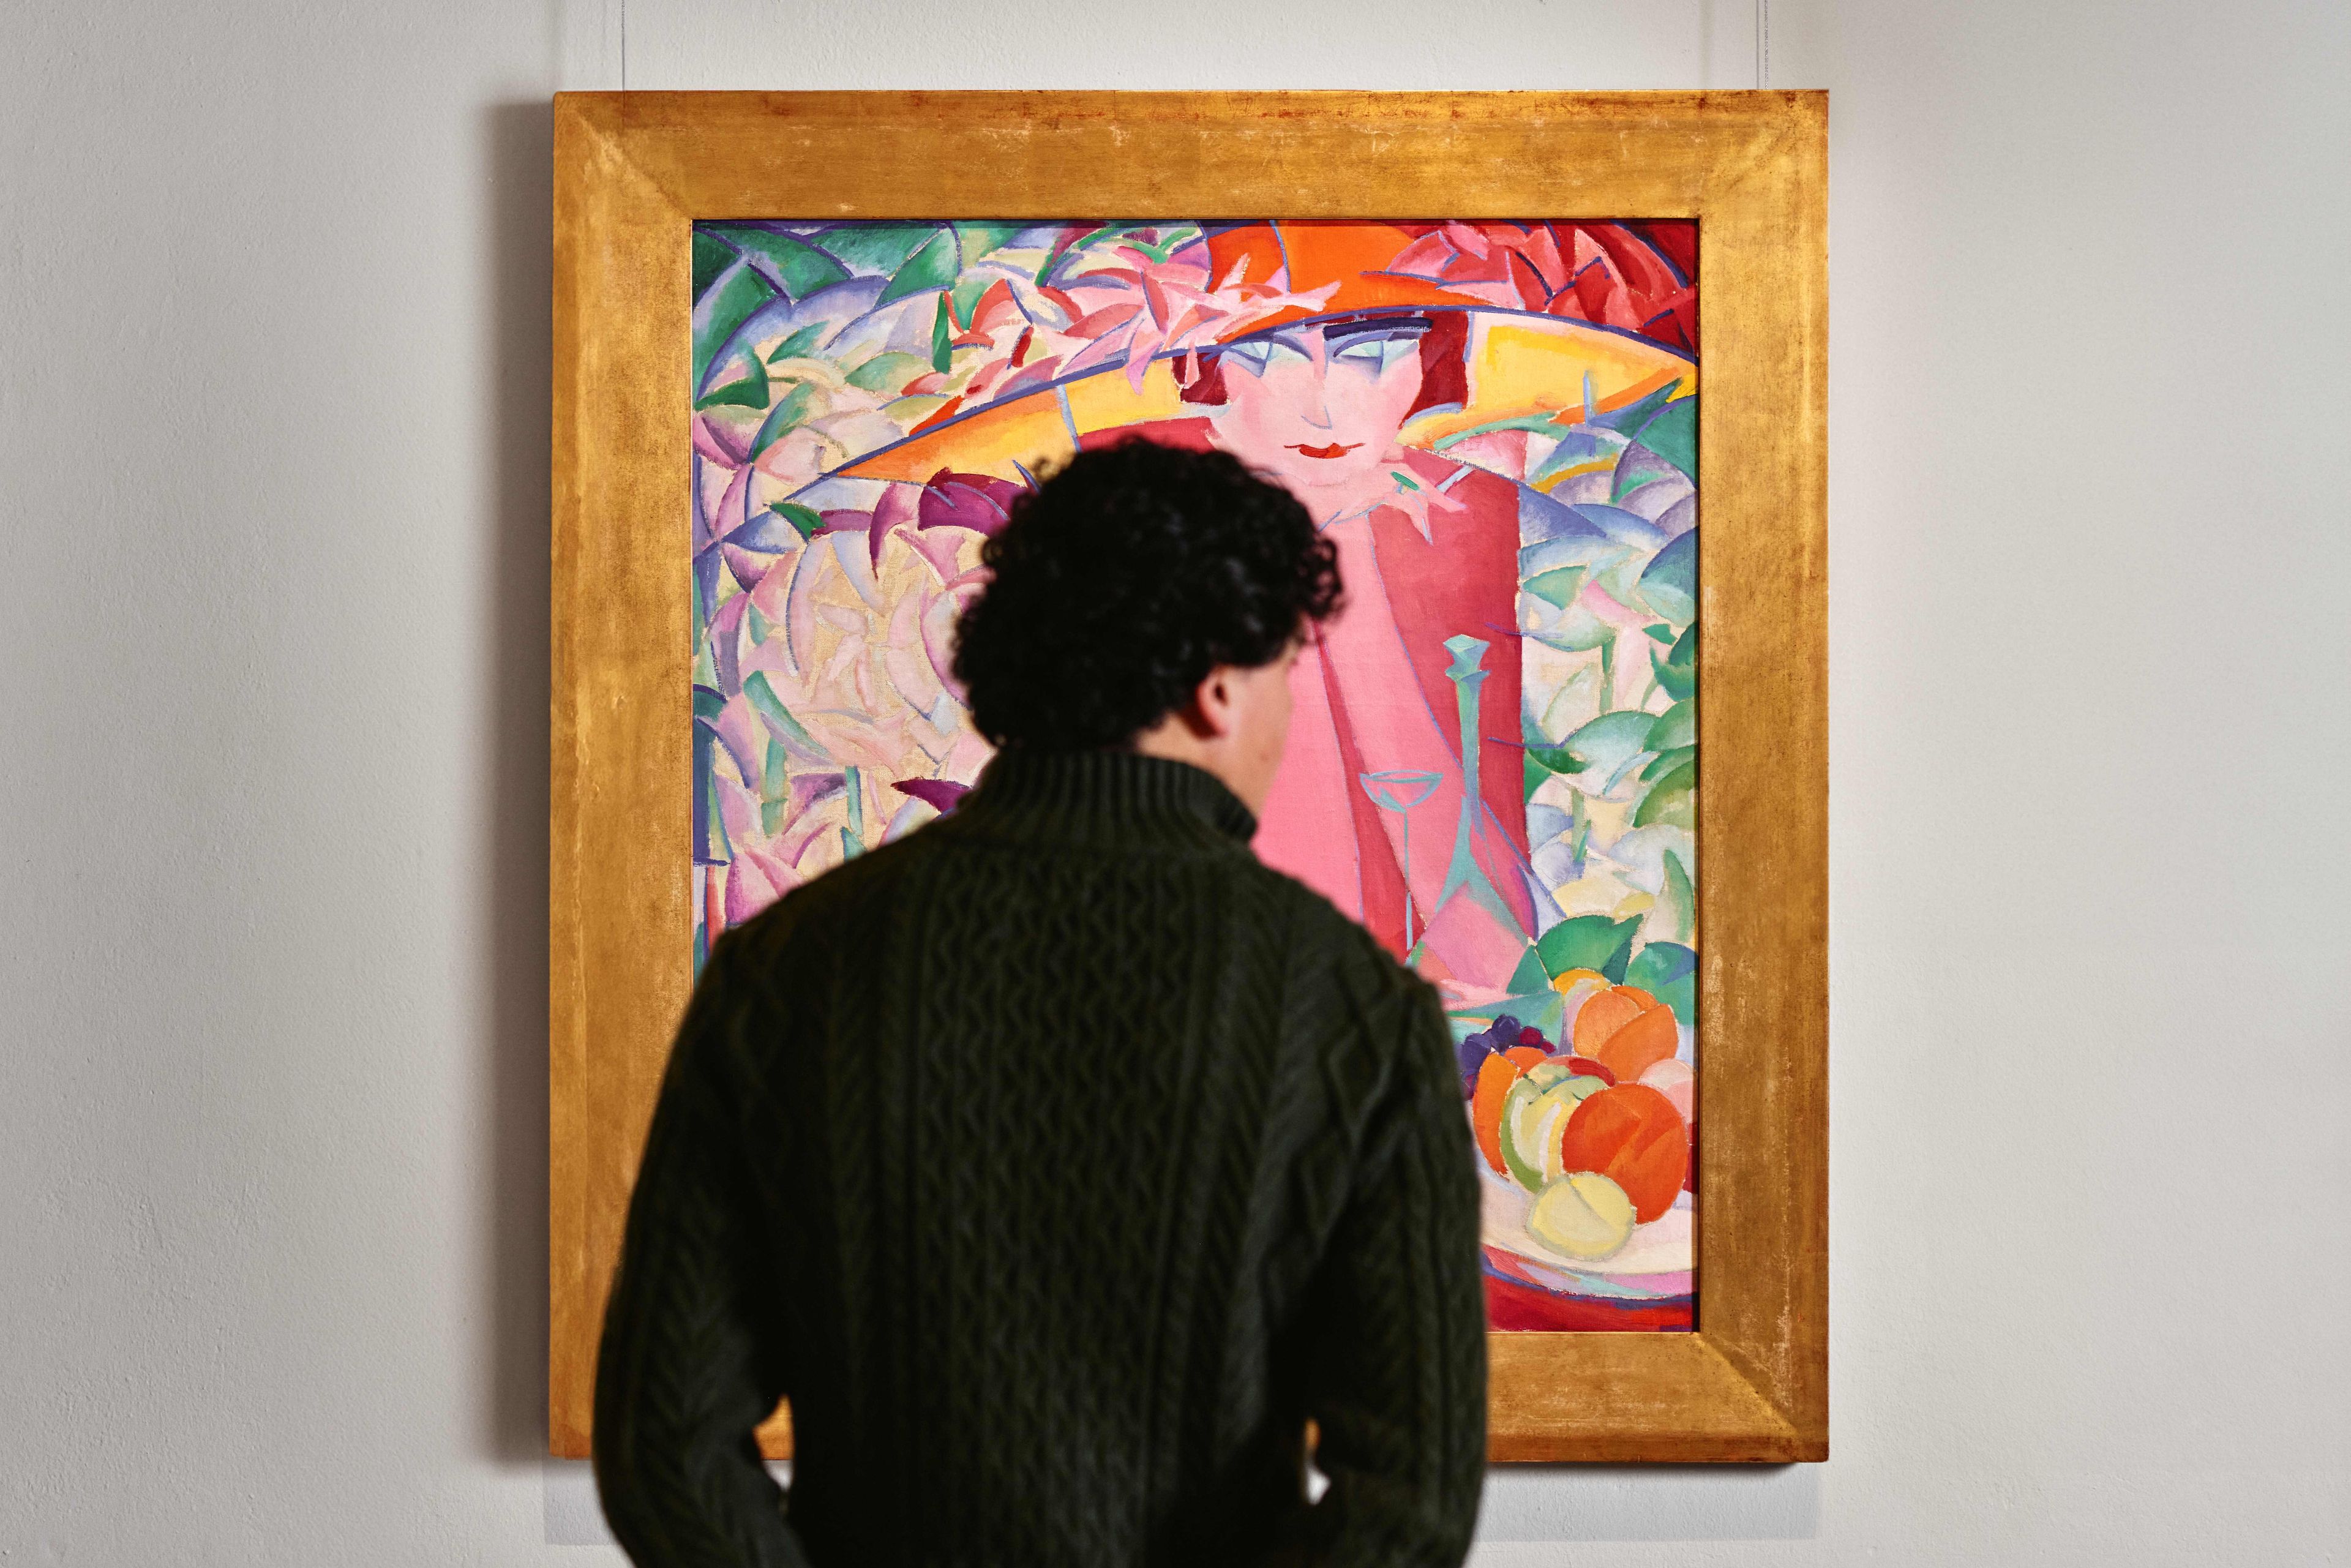 Visitor looking at work of art ‘Lady with Large Hat in Summer House’ by Leo Gestel.